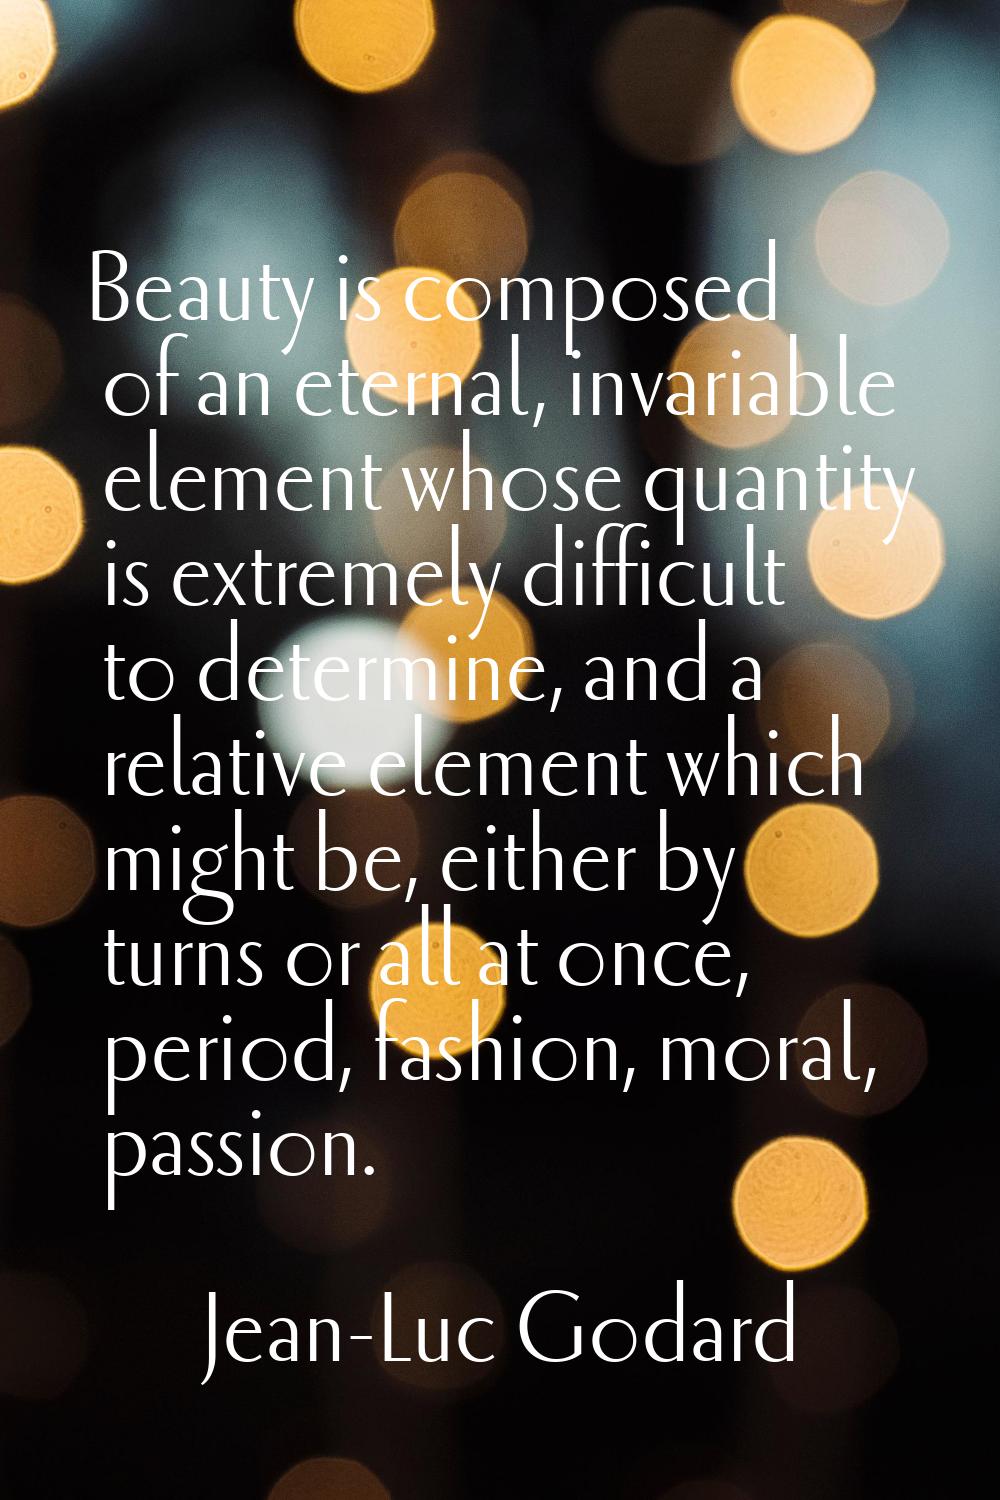 Beauty is composed of an eternal, invariable element whose quantity is extremely difficult to deter